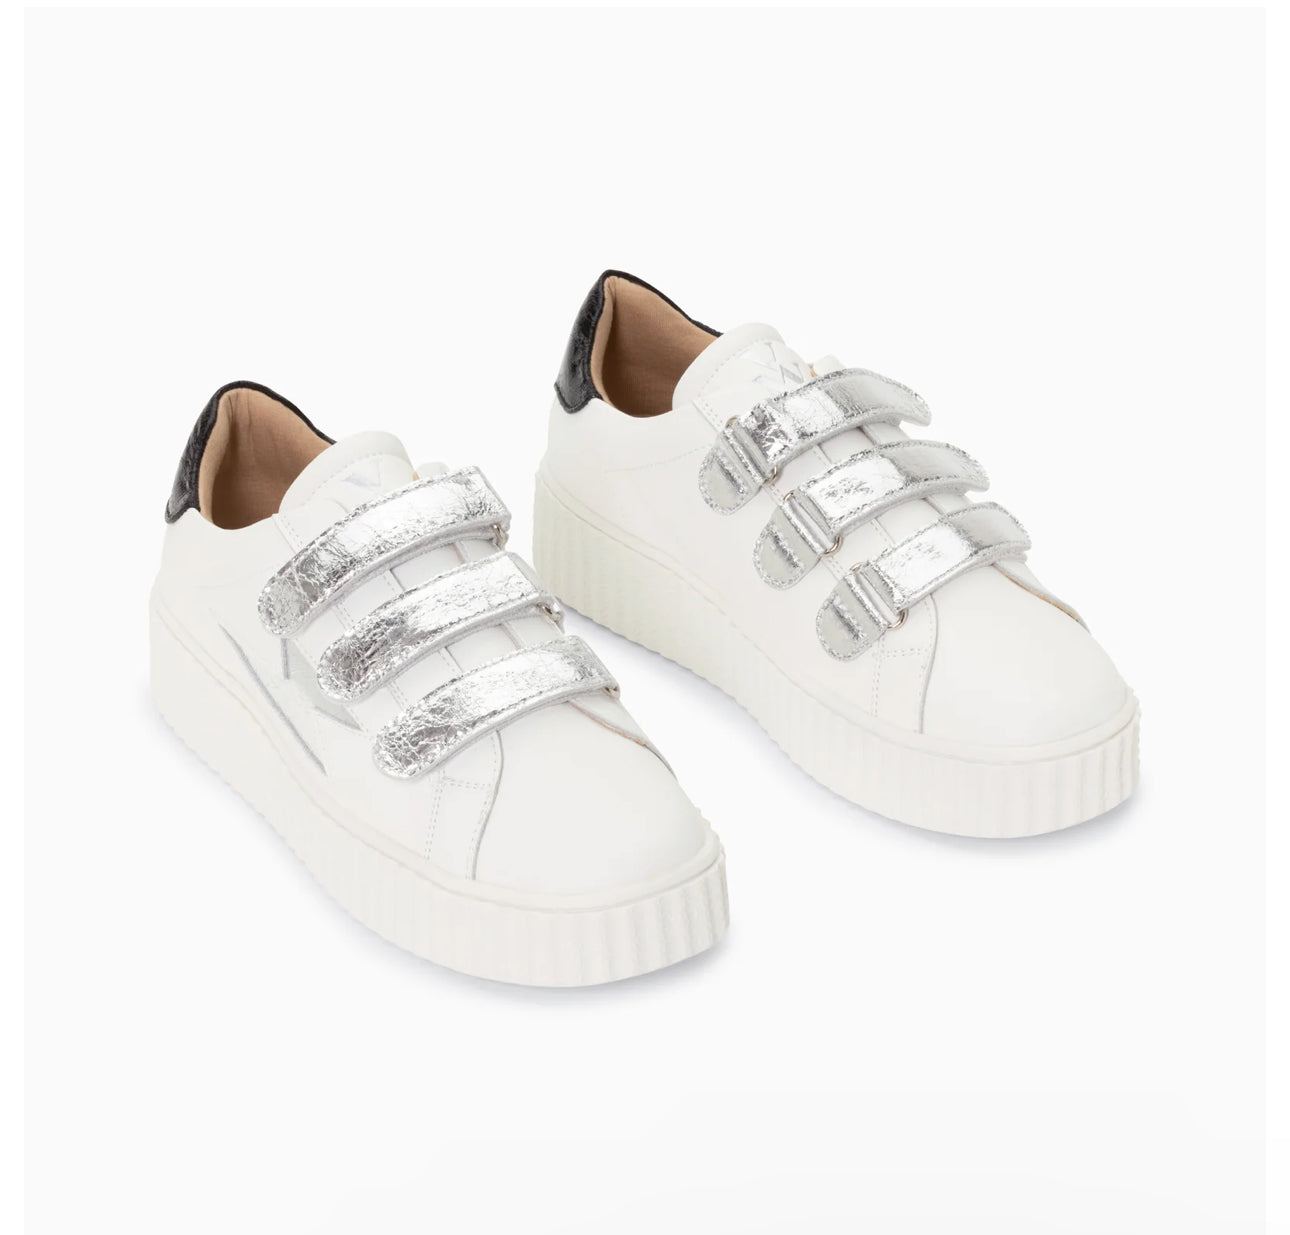 Marilou White Storm Trainers both